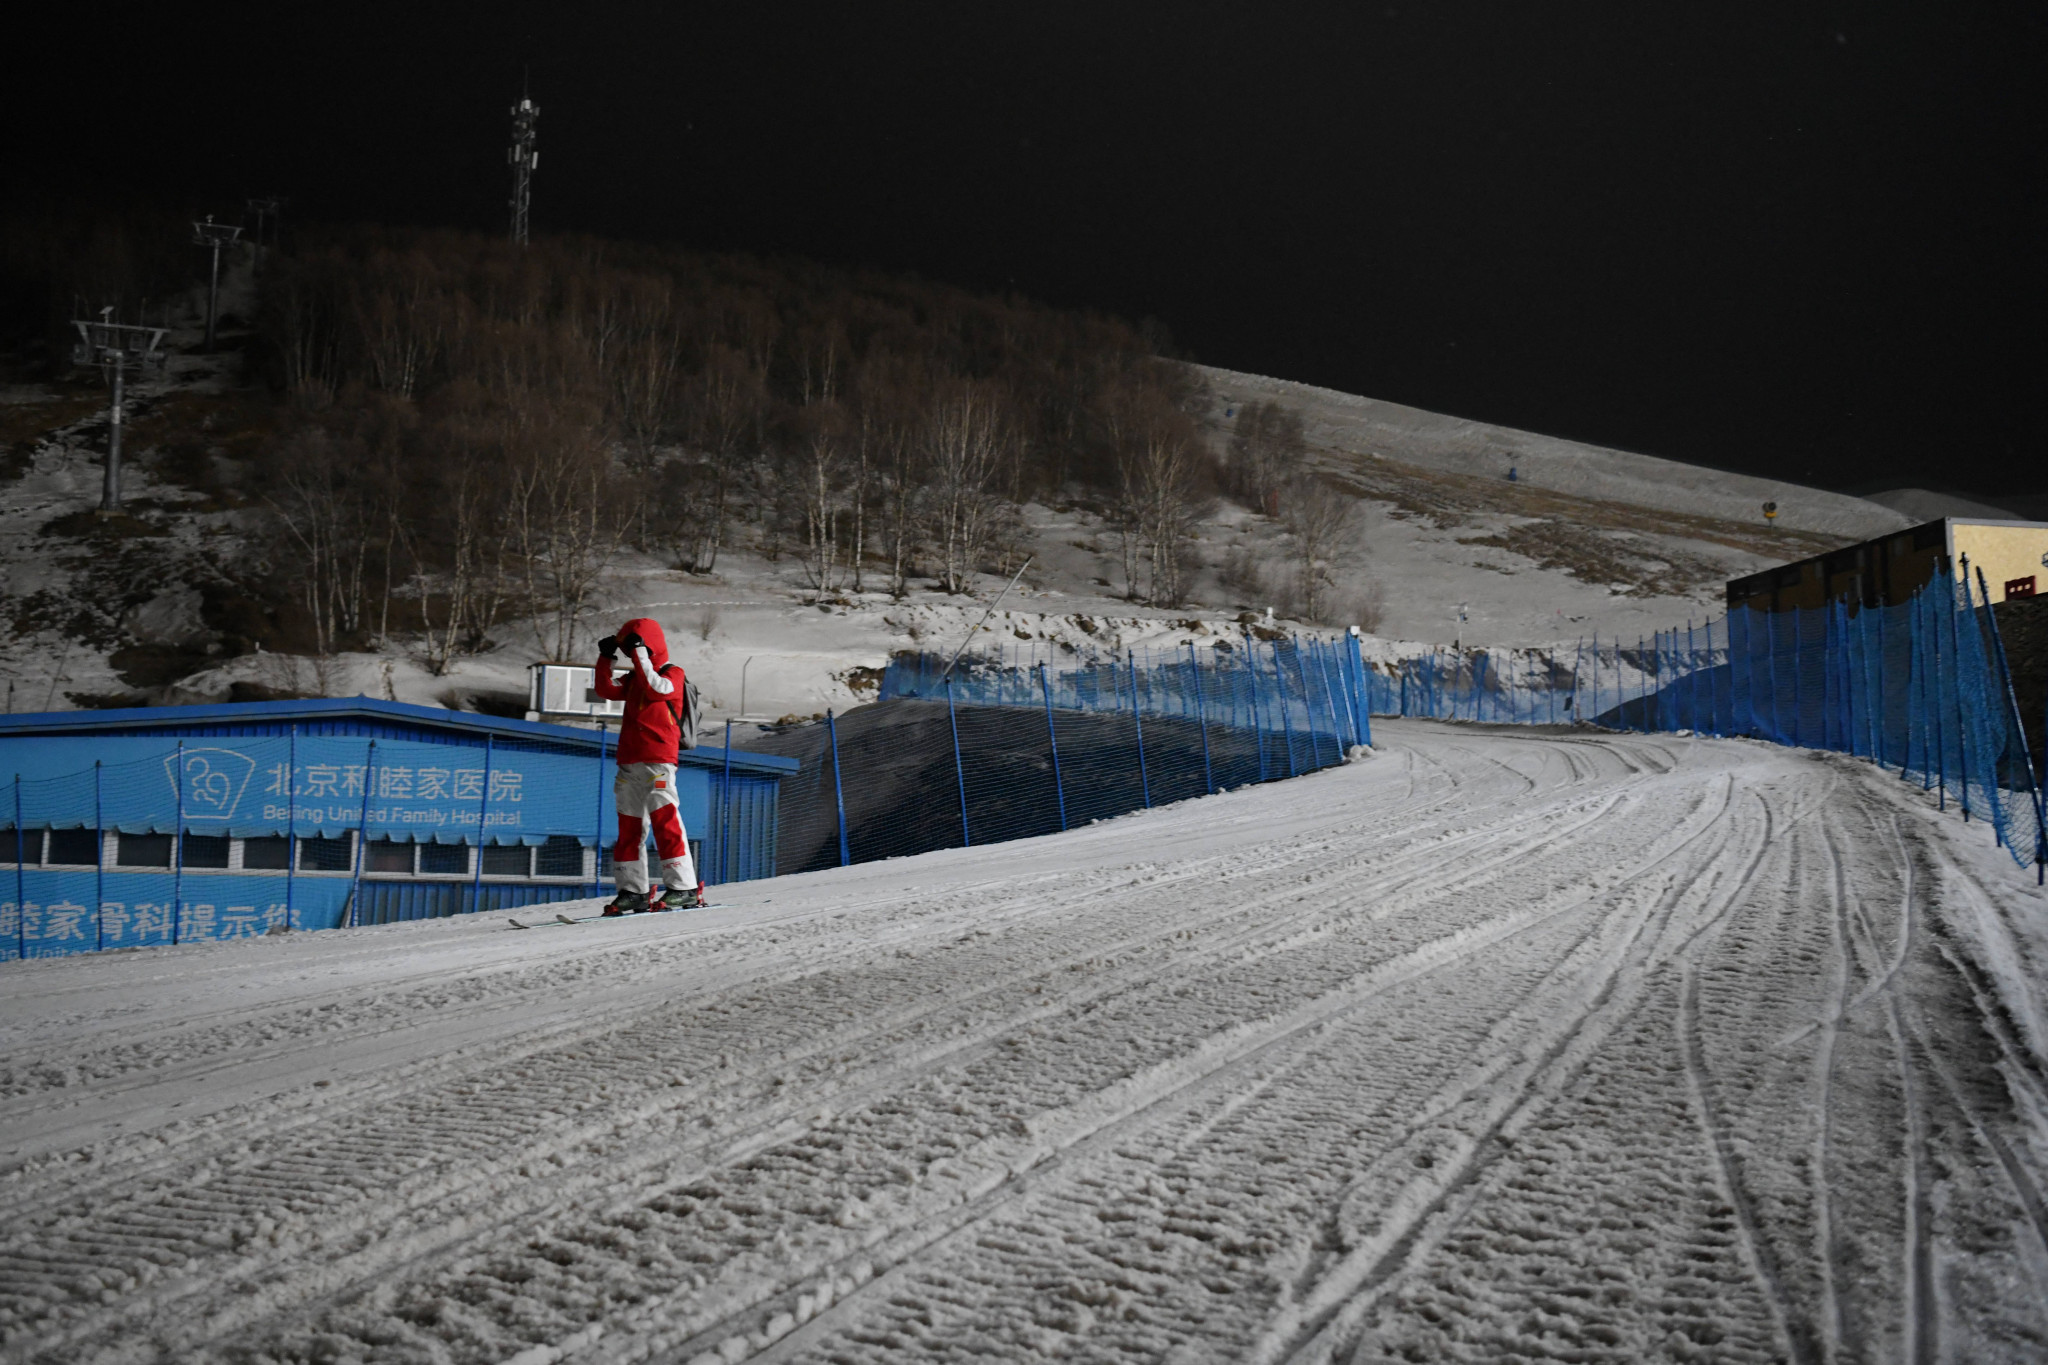 FIS confident in preparations for Ski and Snowboard Cross World Cup test events in Beijing